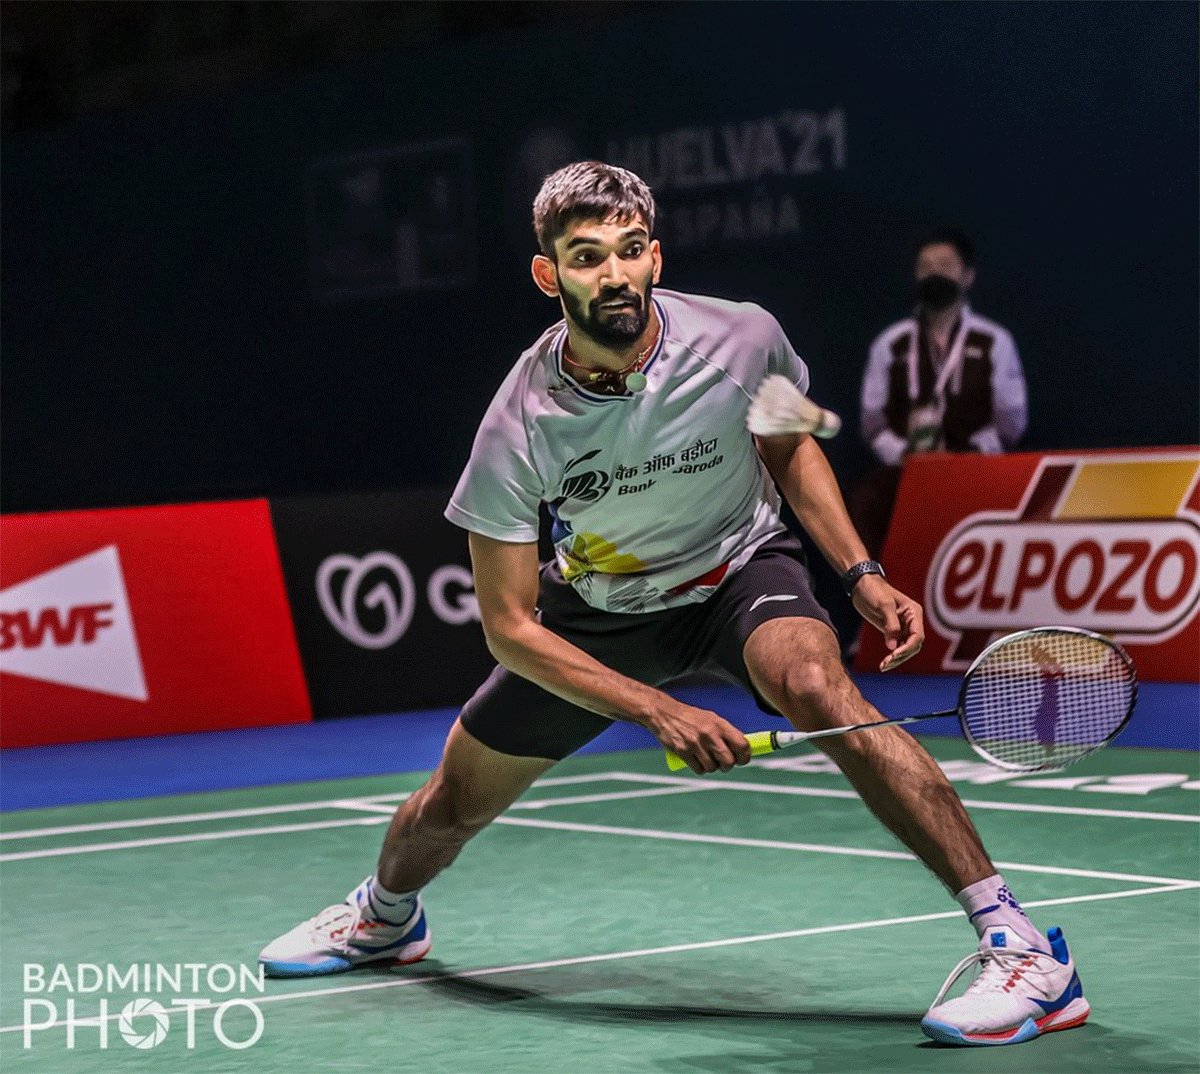 Kidambi Srikanth next faces qualifier Nhat Nguyen of Ireland in the 2nd round. 